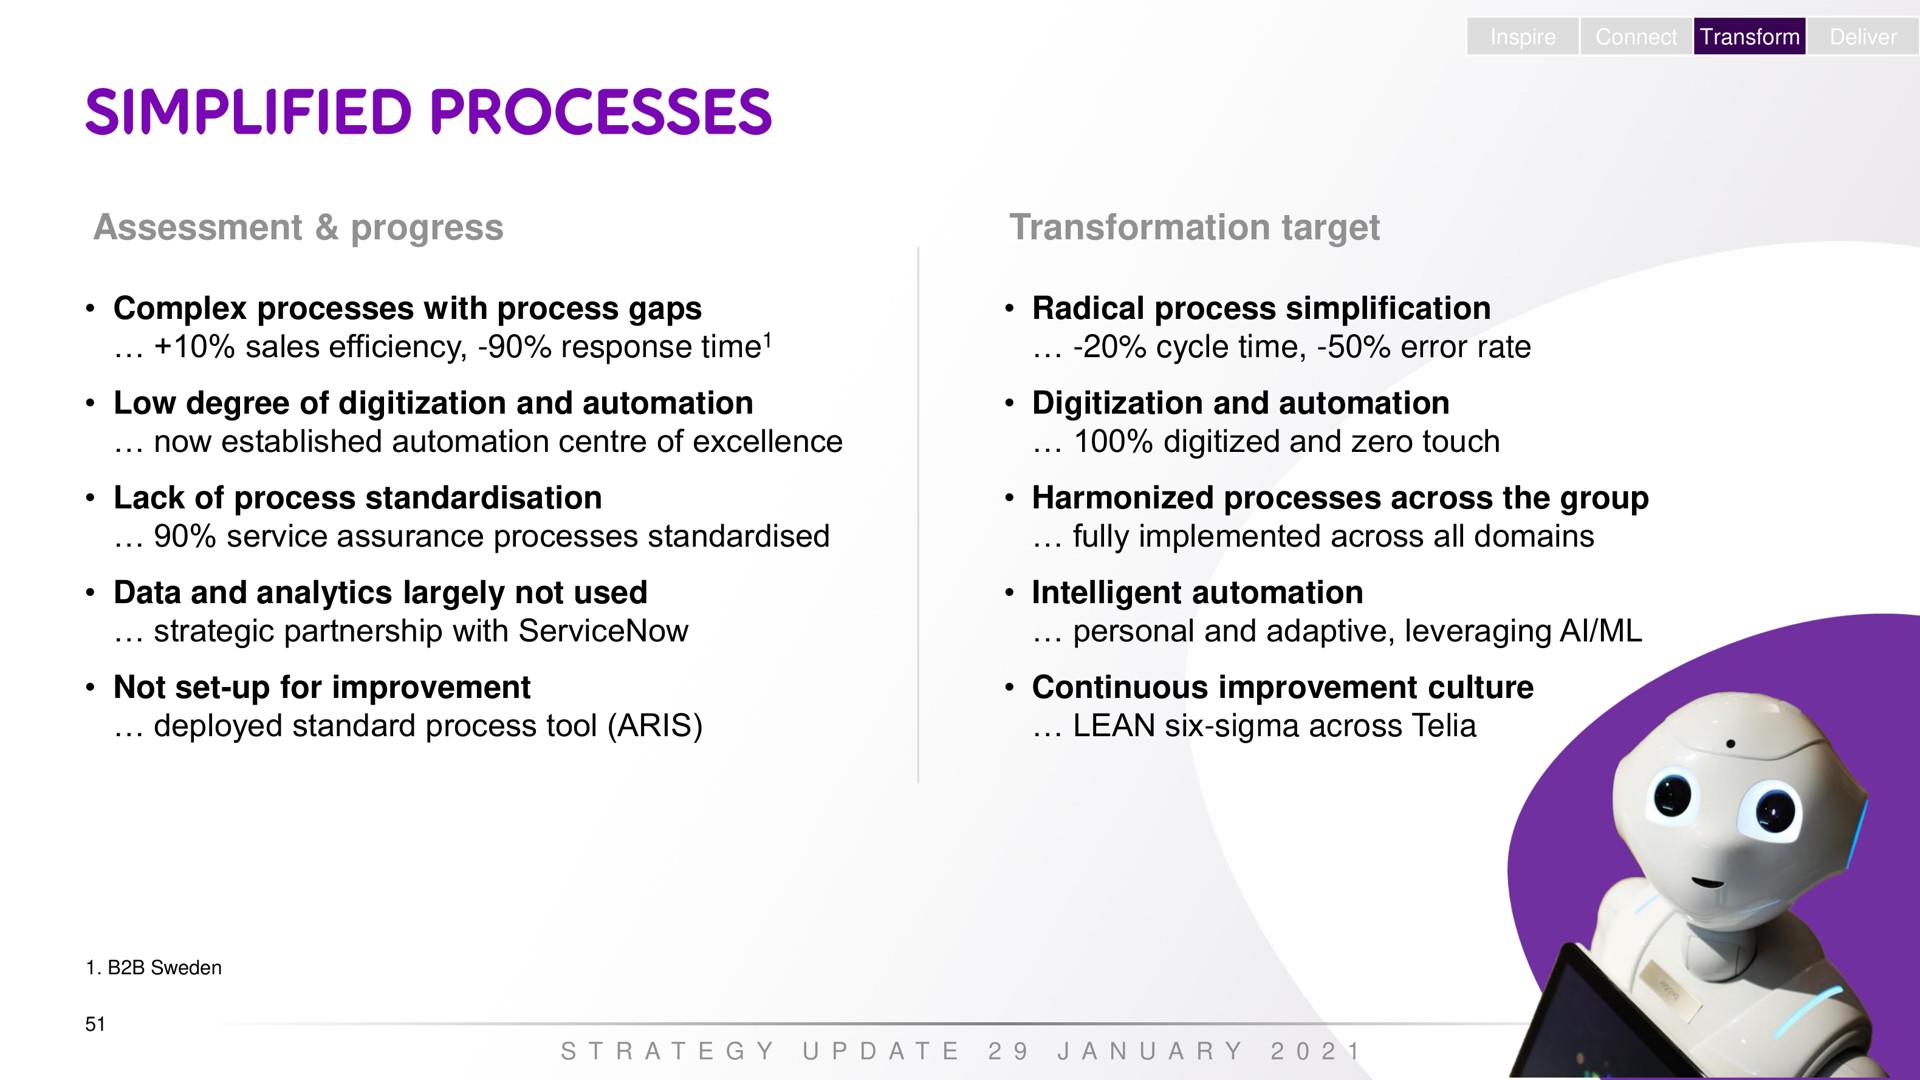 inspire connect transform deliver assessment progress transformation target complex processes with process gaps sales efficiency response time radical process simplification cycle time error rate low degree of and now established of excellence and digitized and zero touch lack of process service assurance processes harmonized processes across the group fully implemented across all domains data and analytics largely not used strategic partnership with not set up for improvement deployed standard process tool intelligent personal and adaptive leveraging continuous improvement culture lean six sigma across a a a a simplified | Telia Company